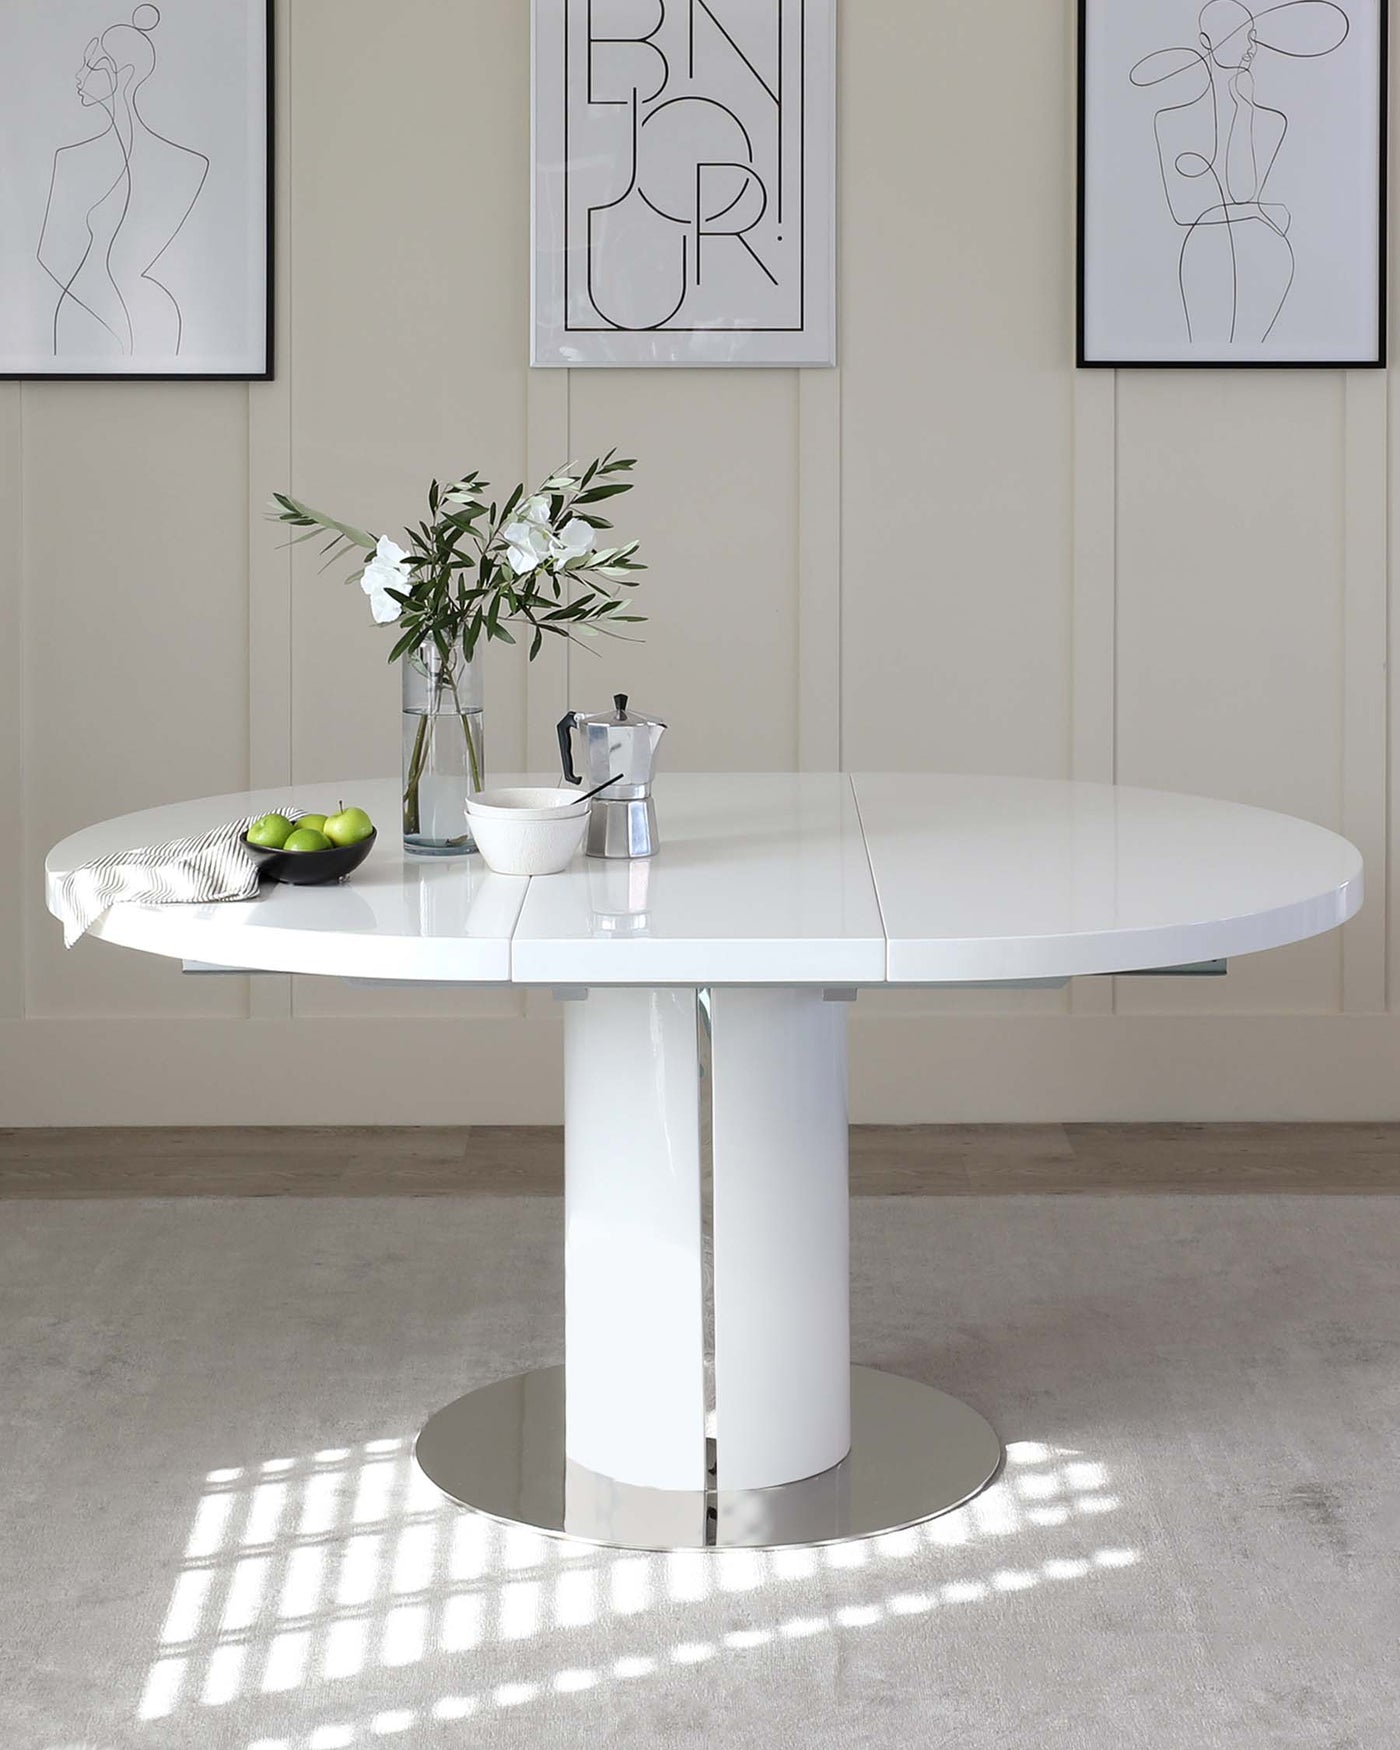 Curva White Gloss Round Extending 4 To 6 Seater Dining Table